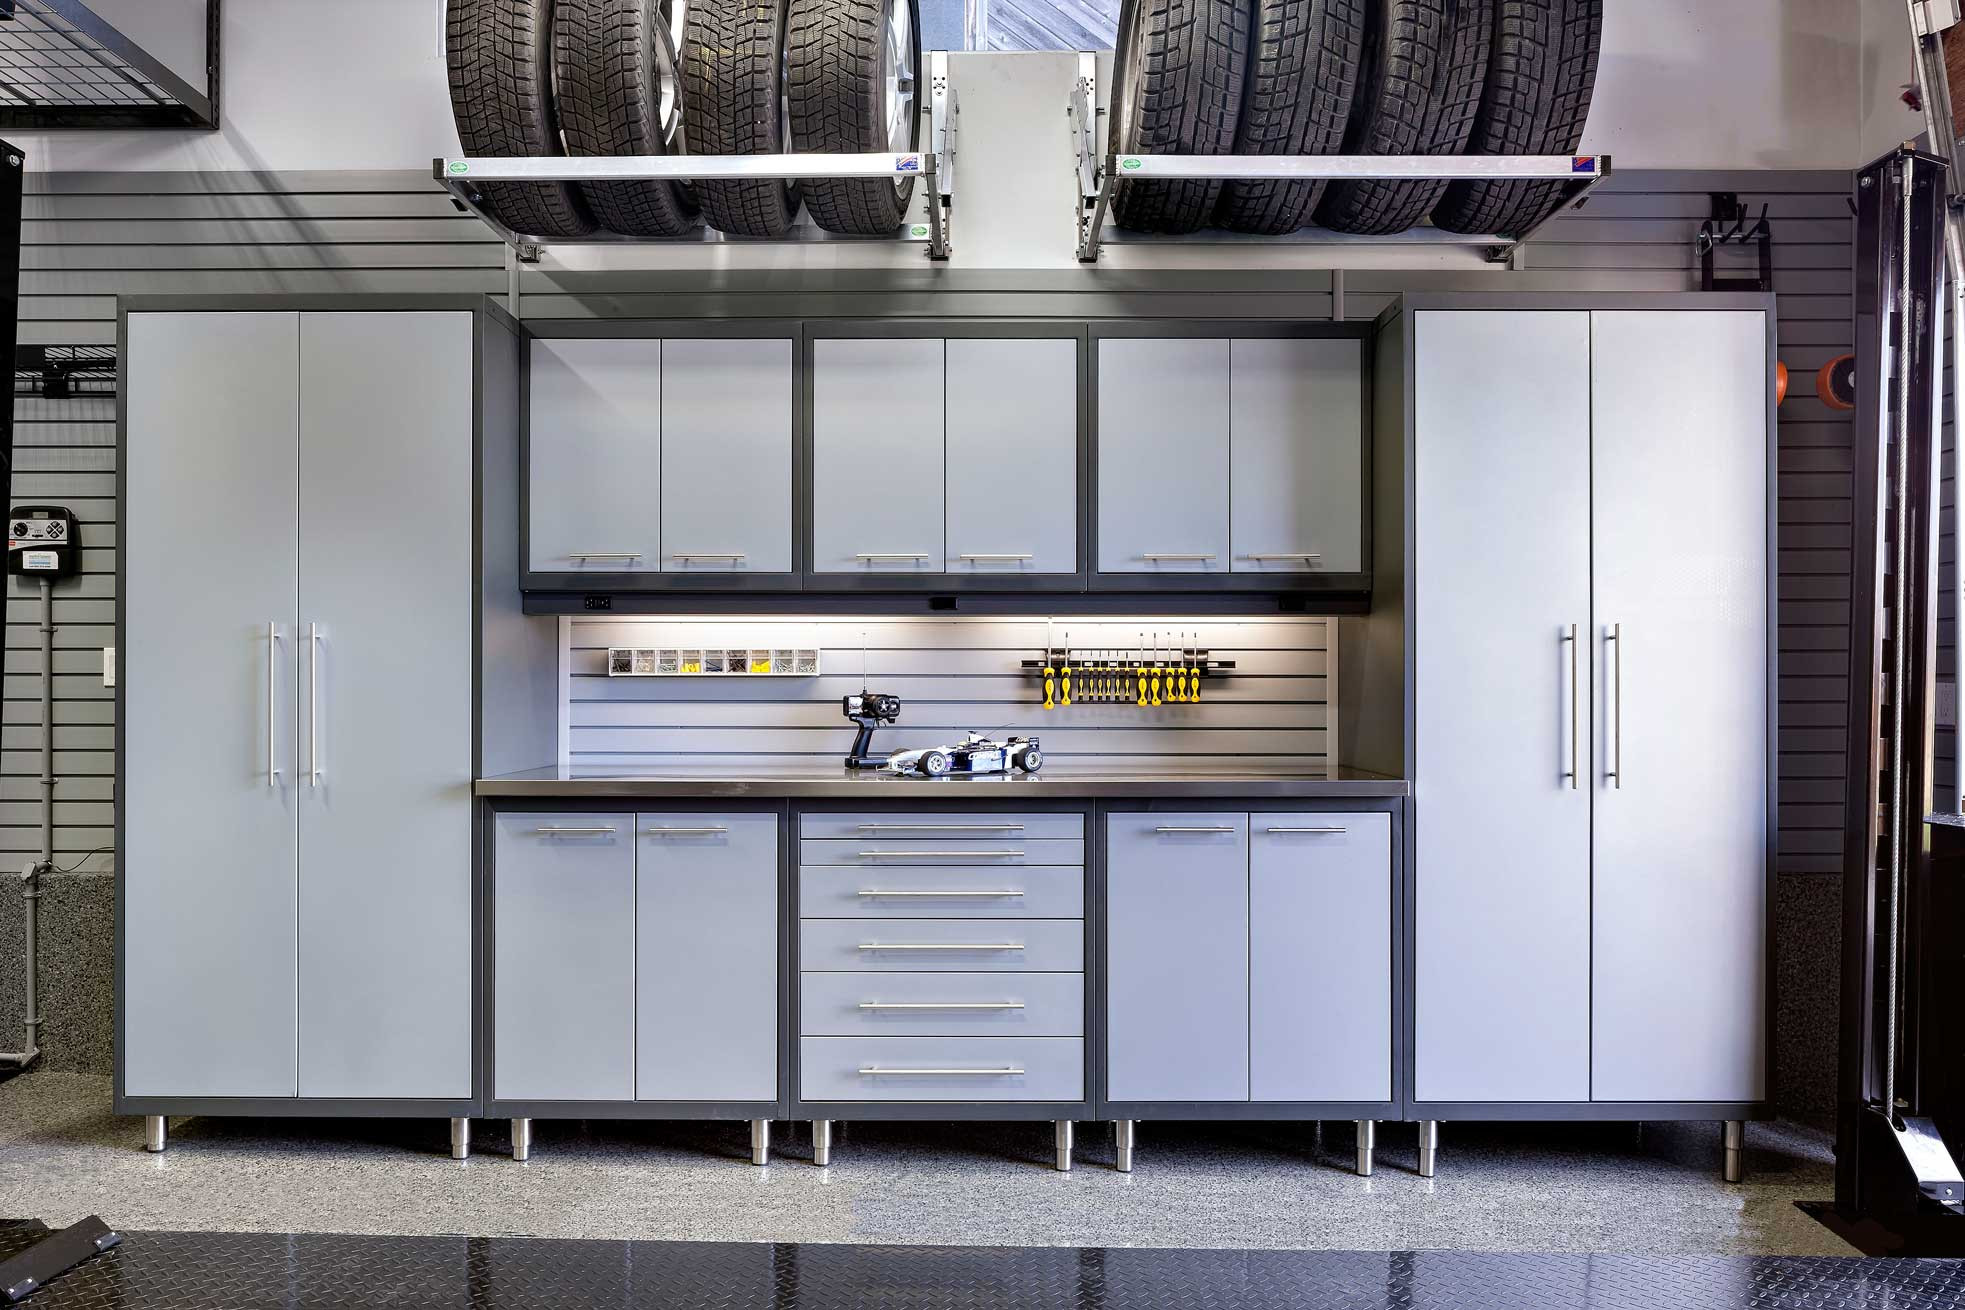 Garage Organizing Systems
 4 Storage Options That Will Maximize Your Garage Space